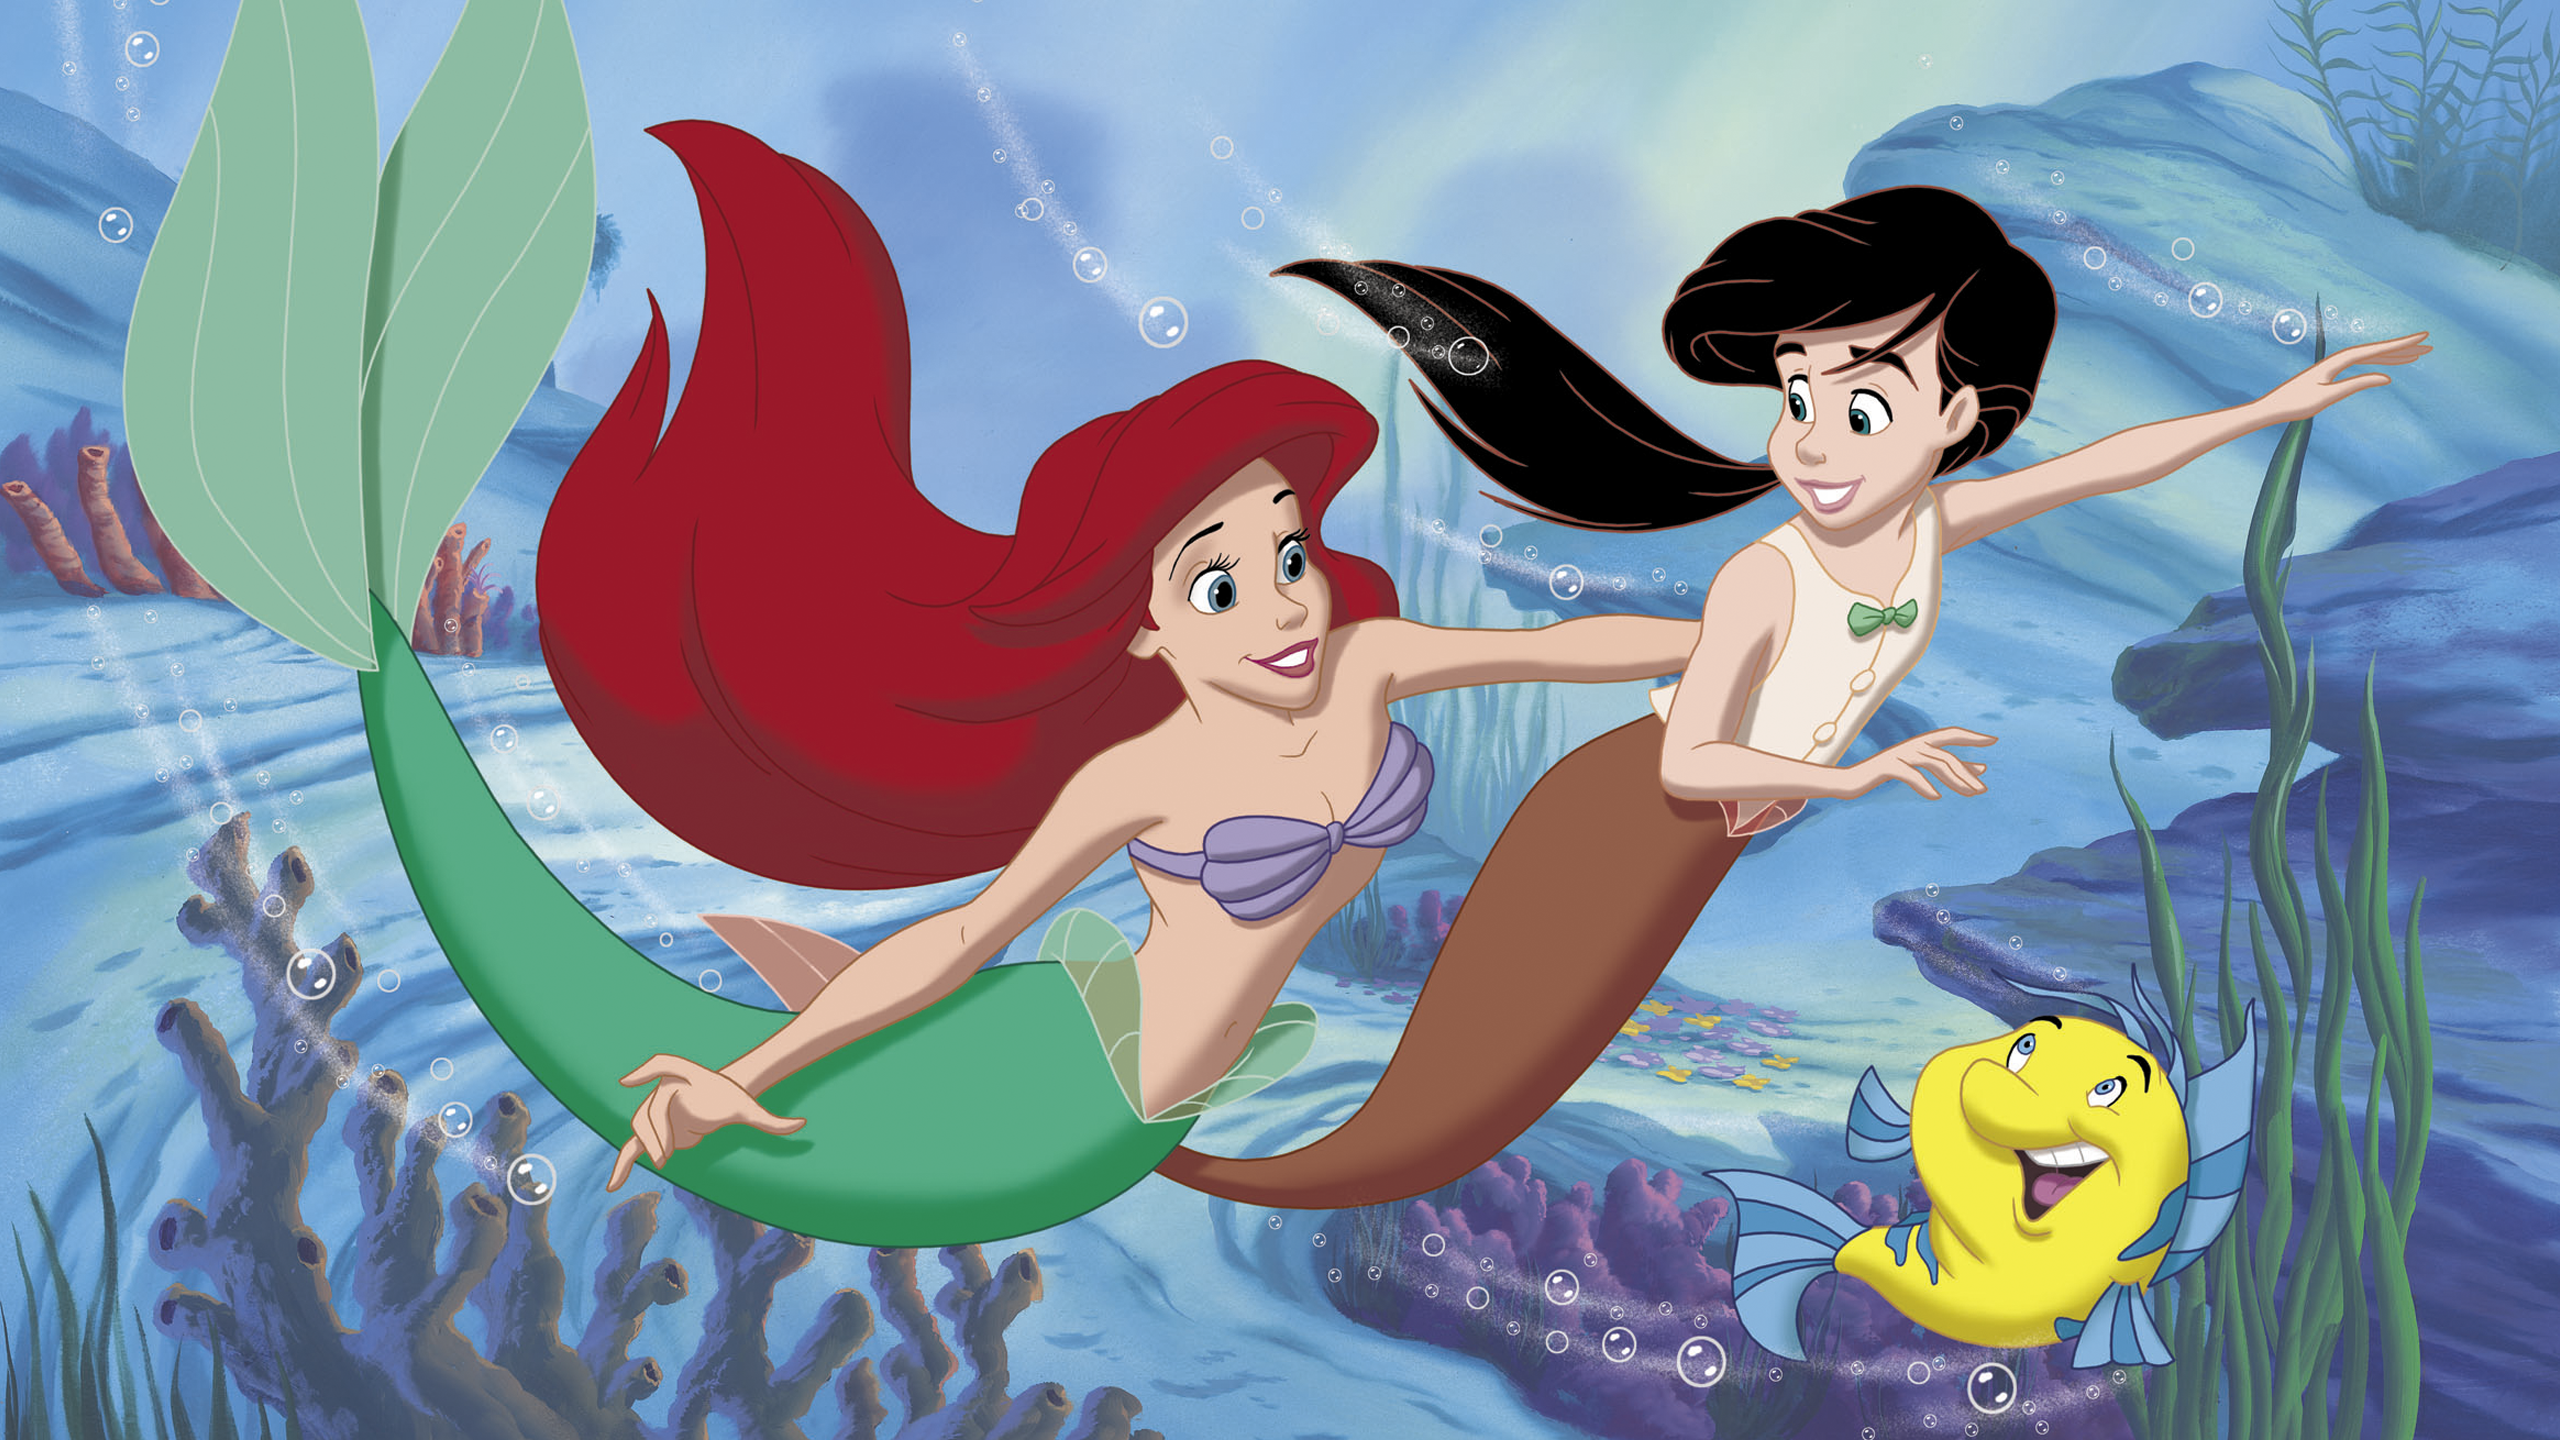 Free download The Little Mermaid II Return to the Sea Full Movie Movies [2560x1440] for your Desktop, Mobile & Tablet. Explore The Little Mermaid 2 Wallpaper. The Little Mermaid